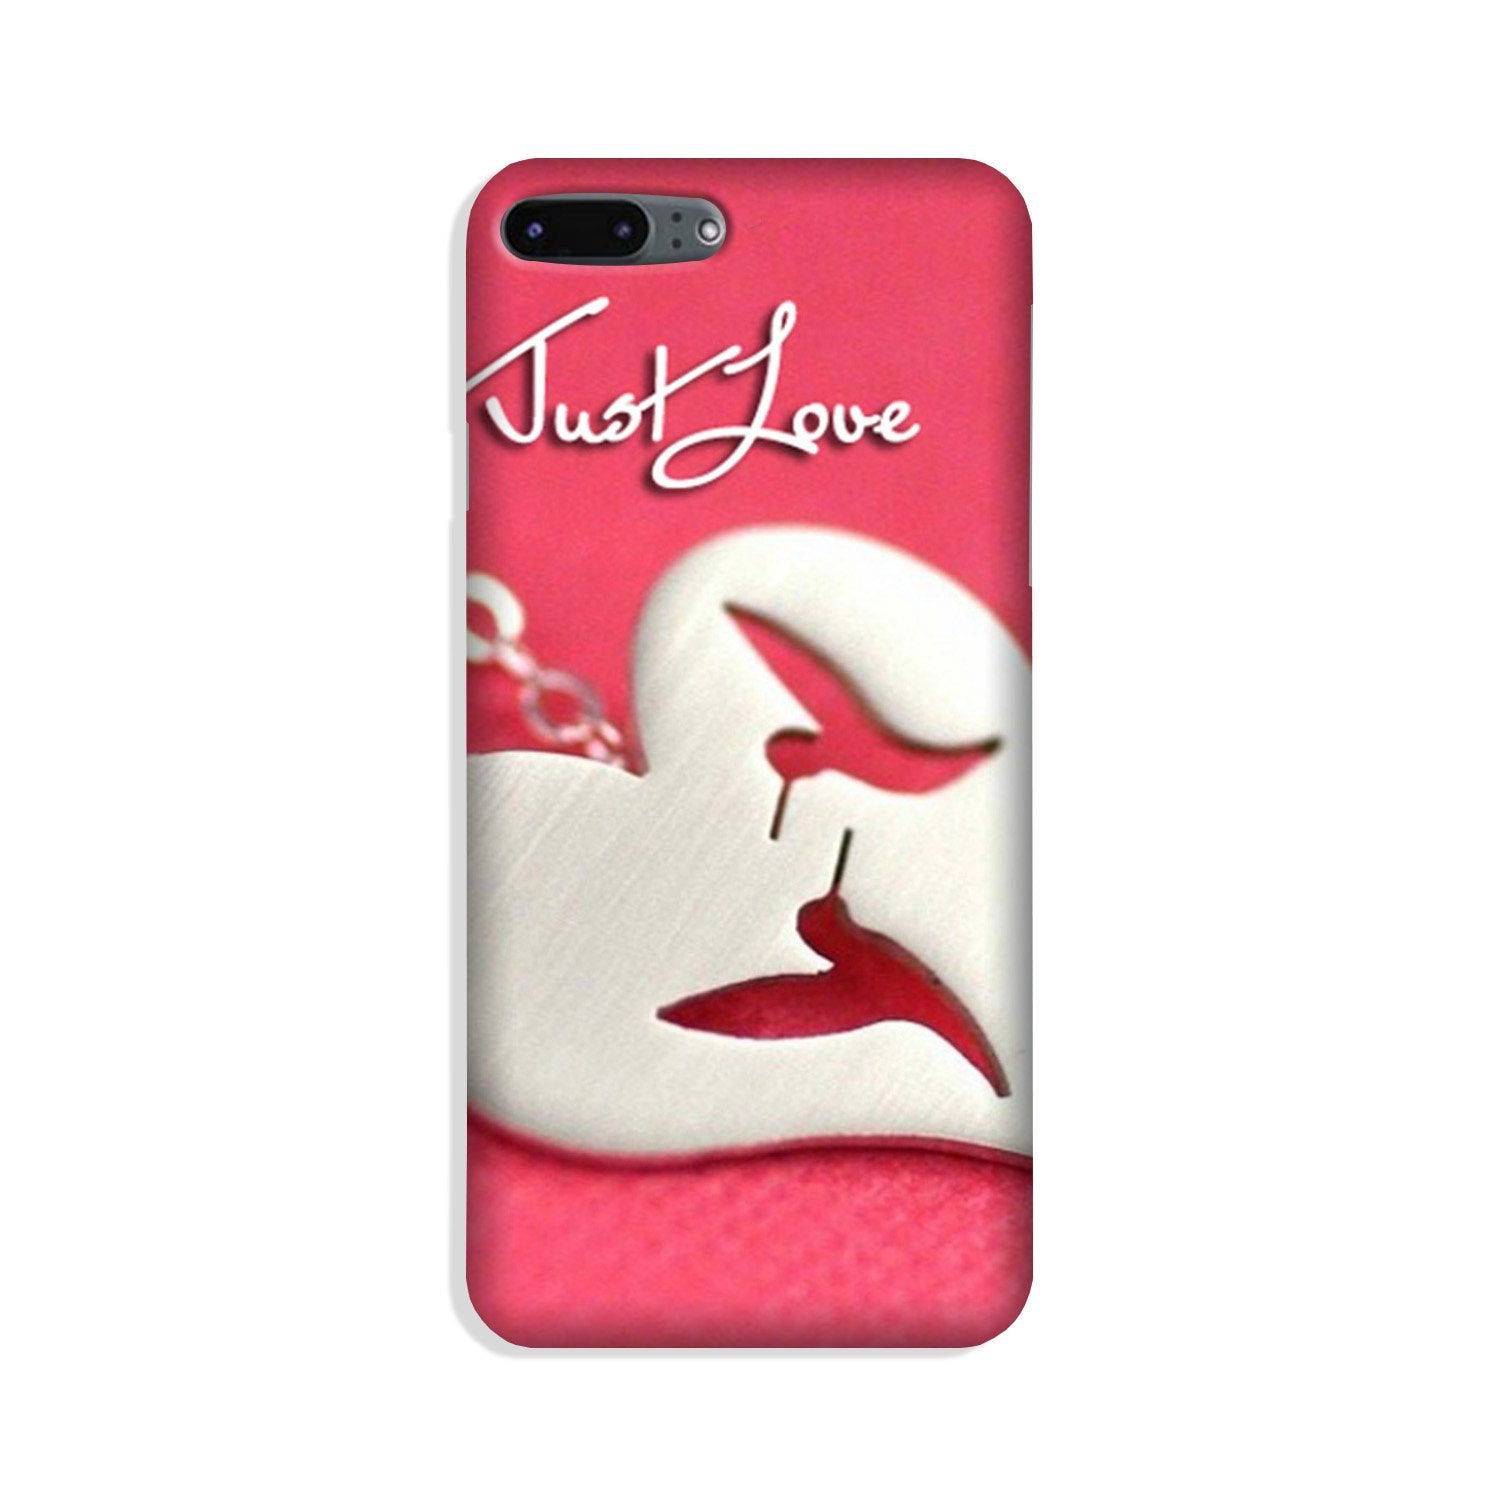 Just love Case for iPhone 8 Plus